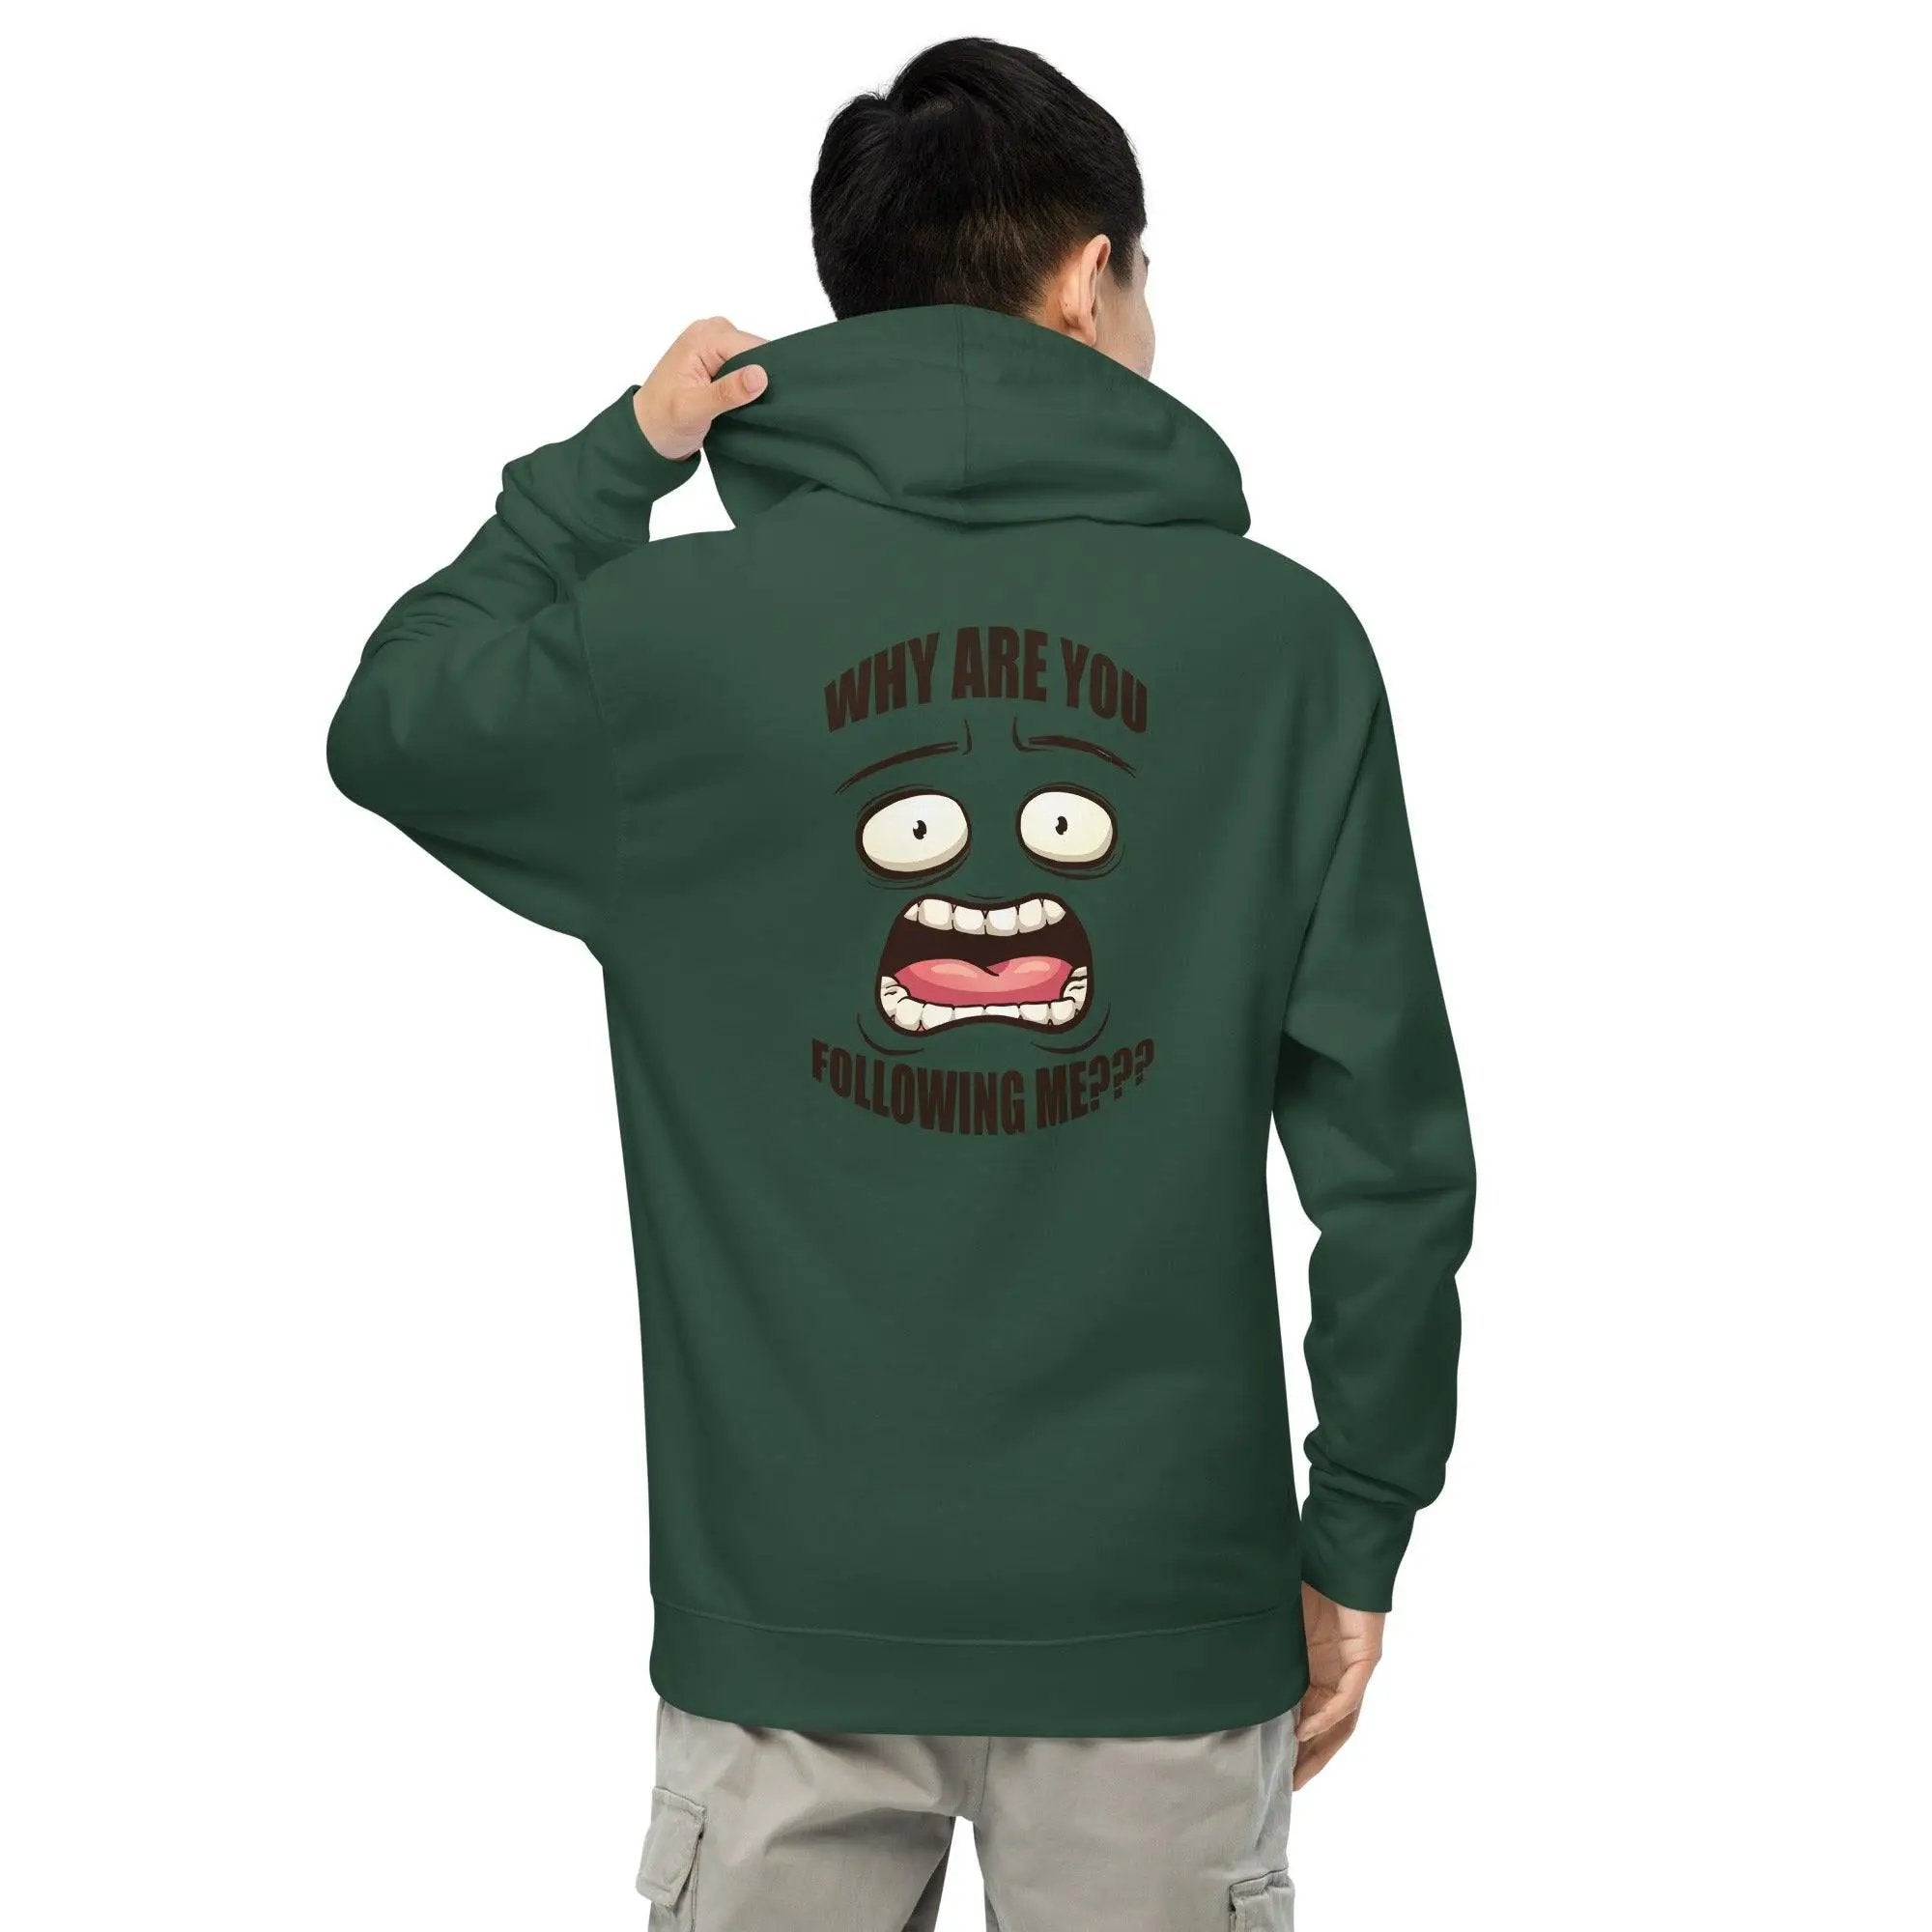 Why Are You Following Me? Unisex midweight hoodie